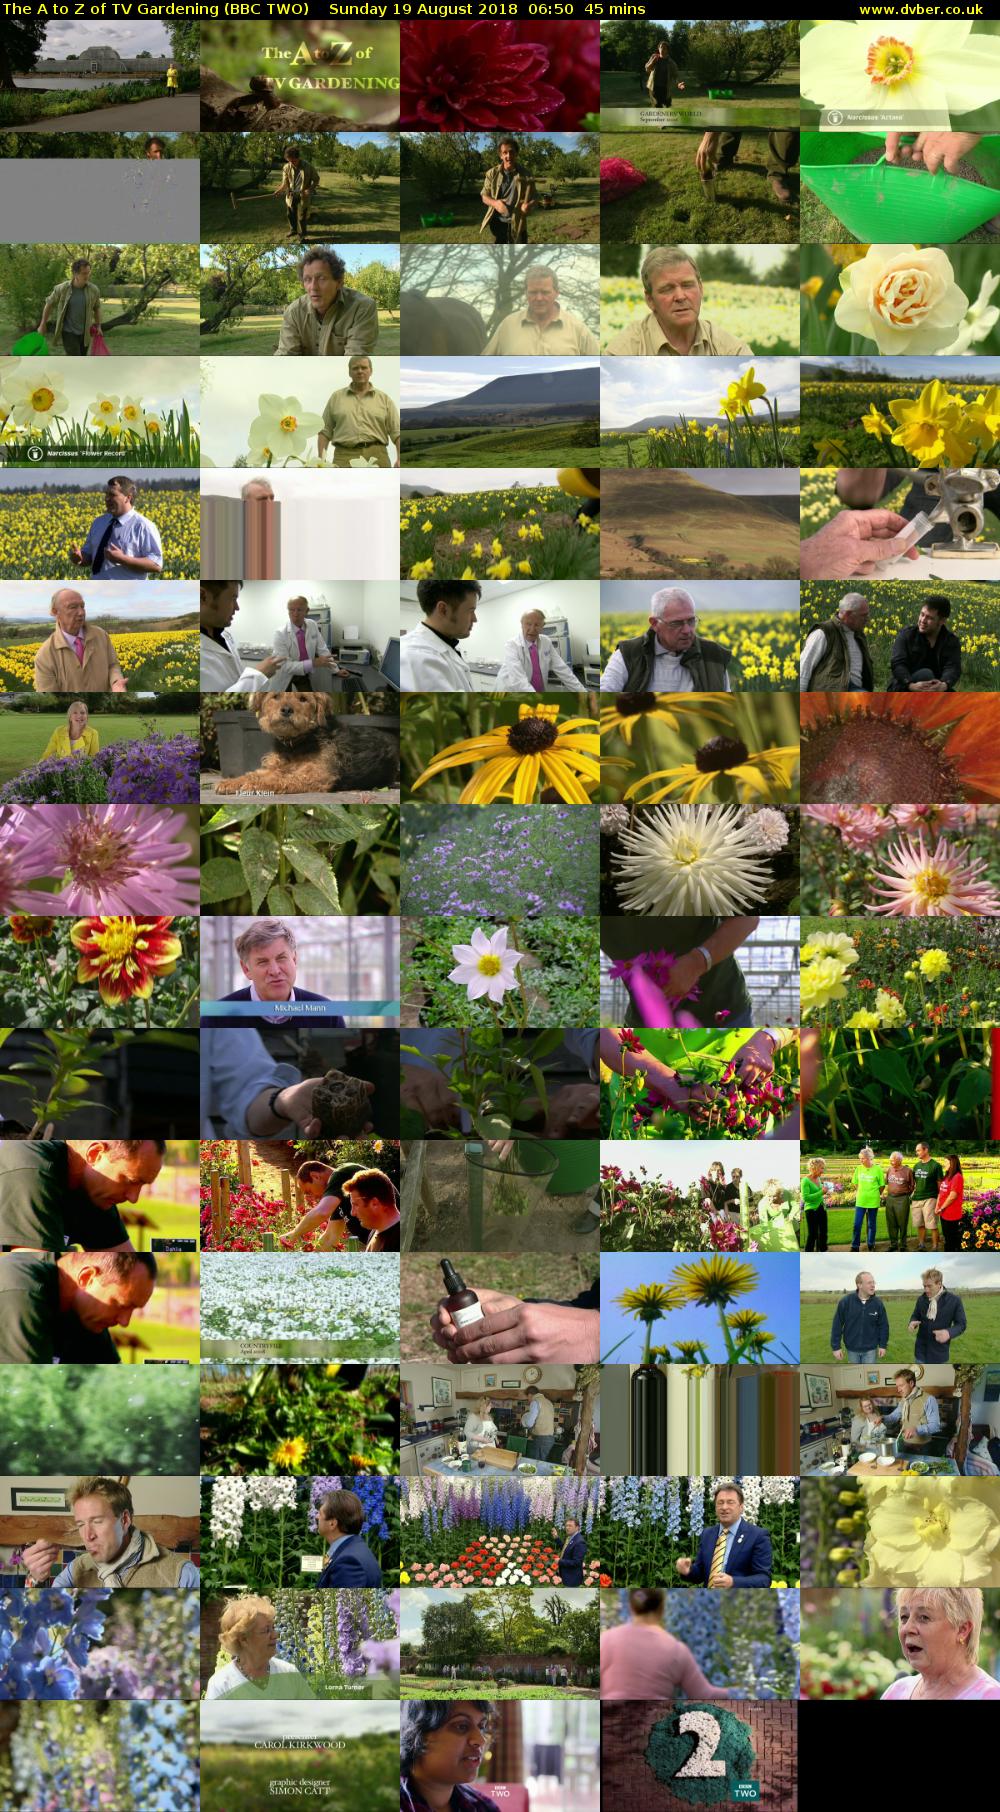 The A to Z of TV Gardening (BBC TWO) Sunday 19 August 2018 06:50 - 07:35